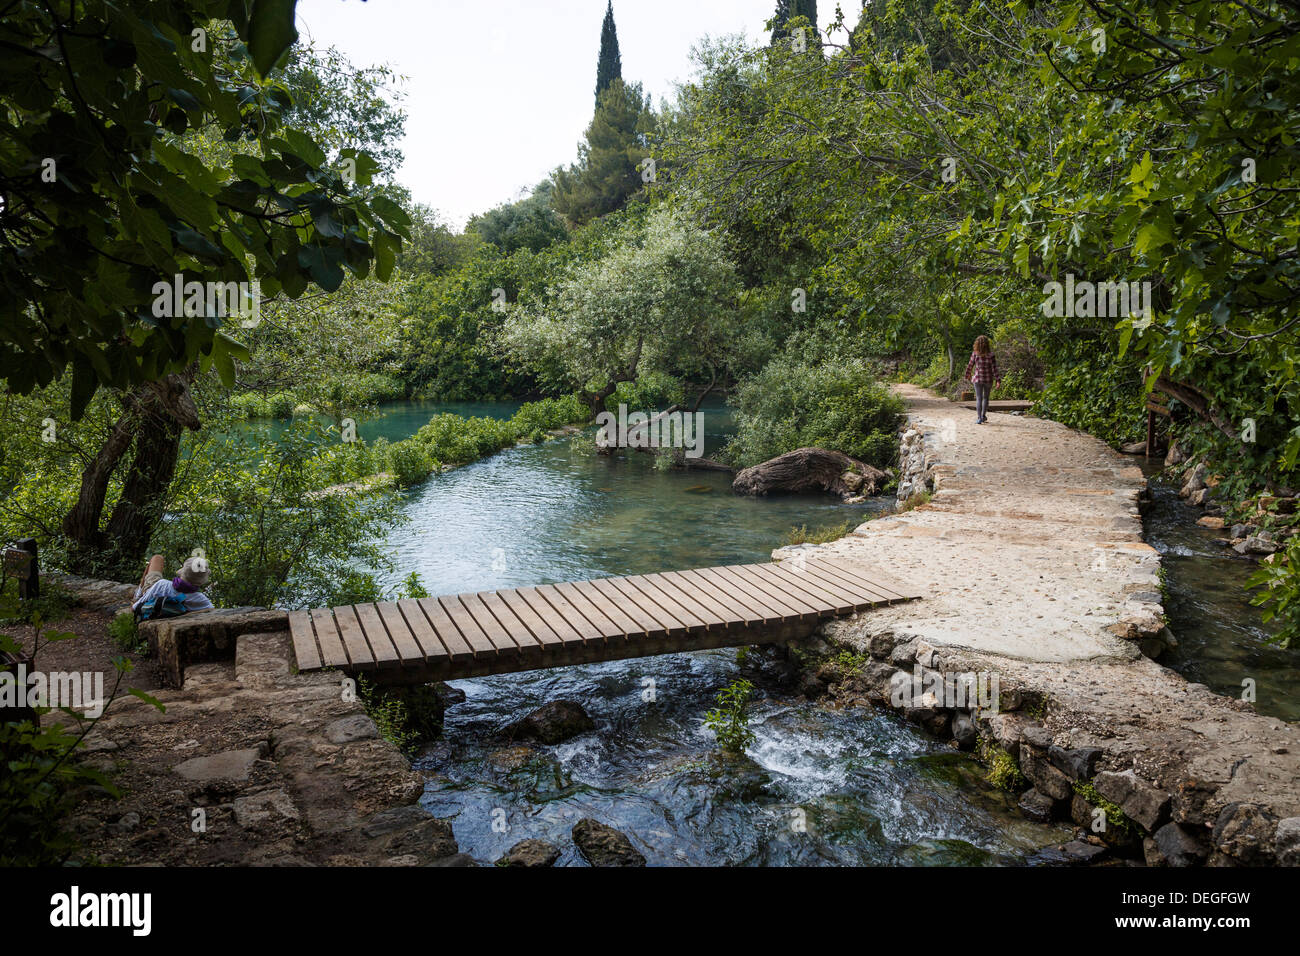 Banias nature reserve, Golan Heights, Israel, Middle East Stock Photo